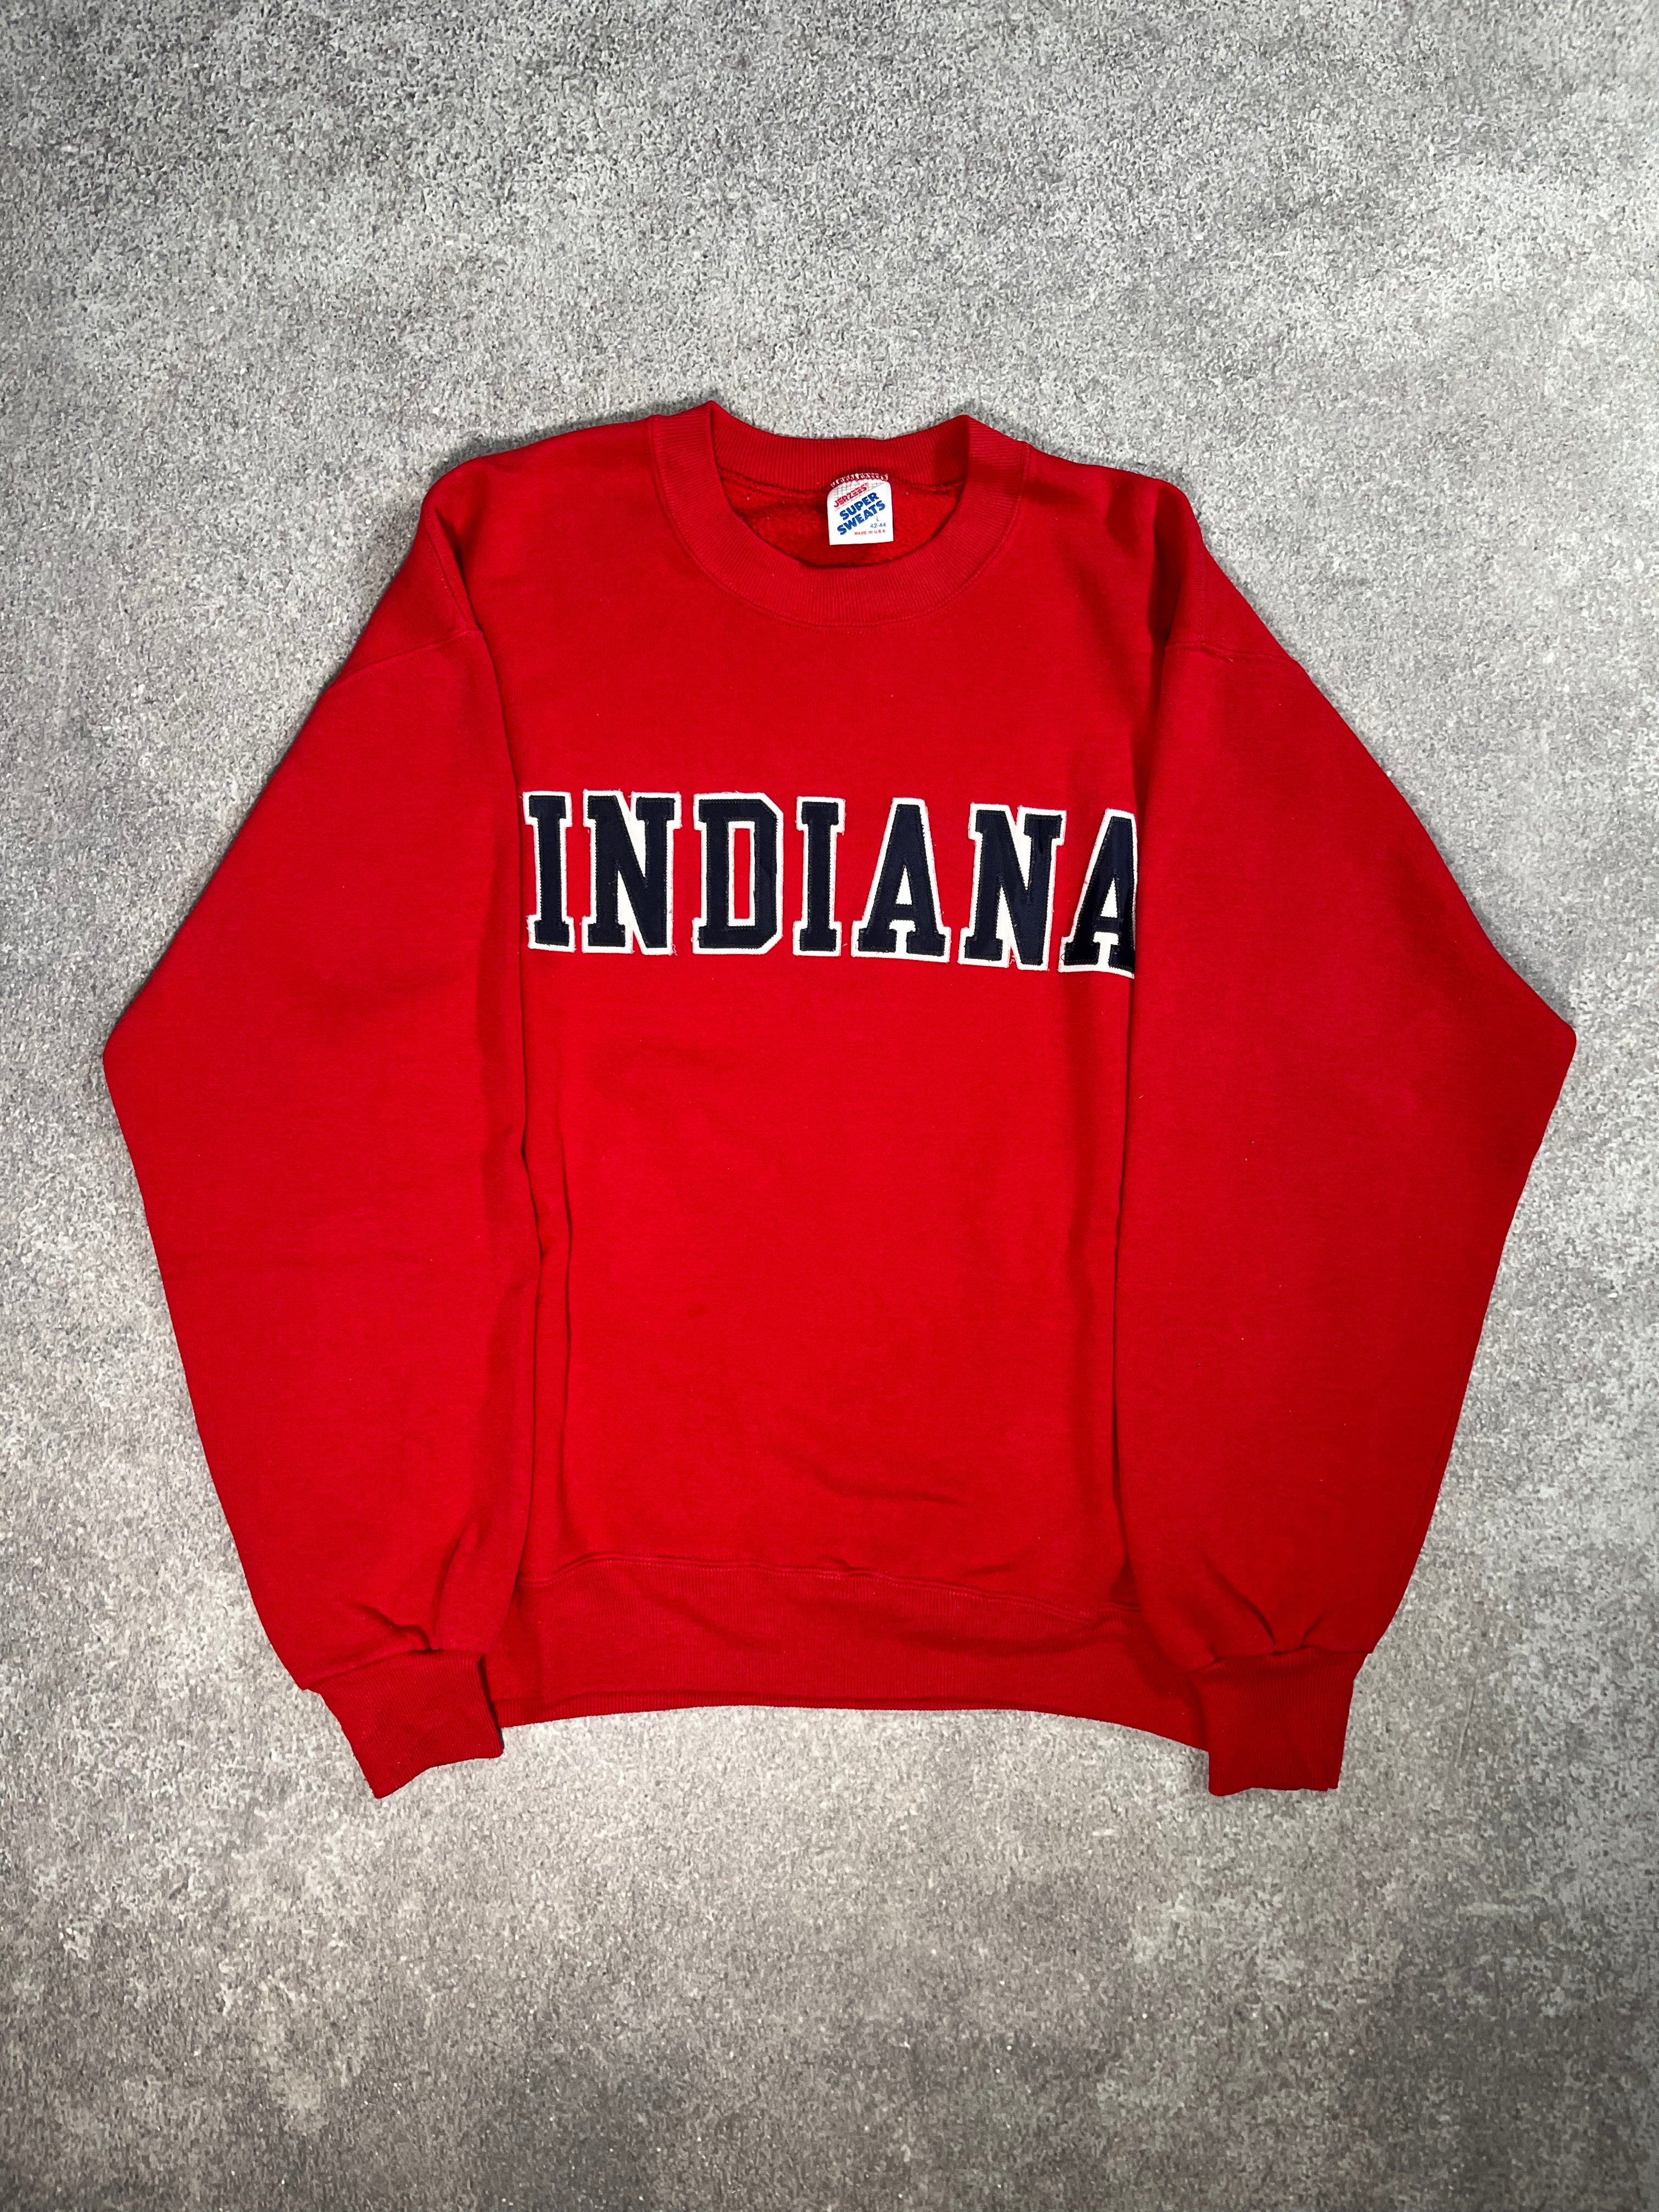 Indiana Spellout Sweatshirt Red // Small - RHAGHOUSE VINTAGE